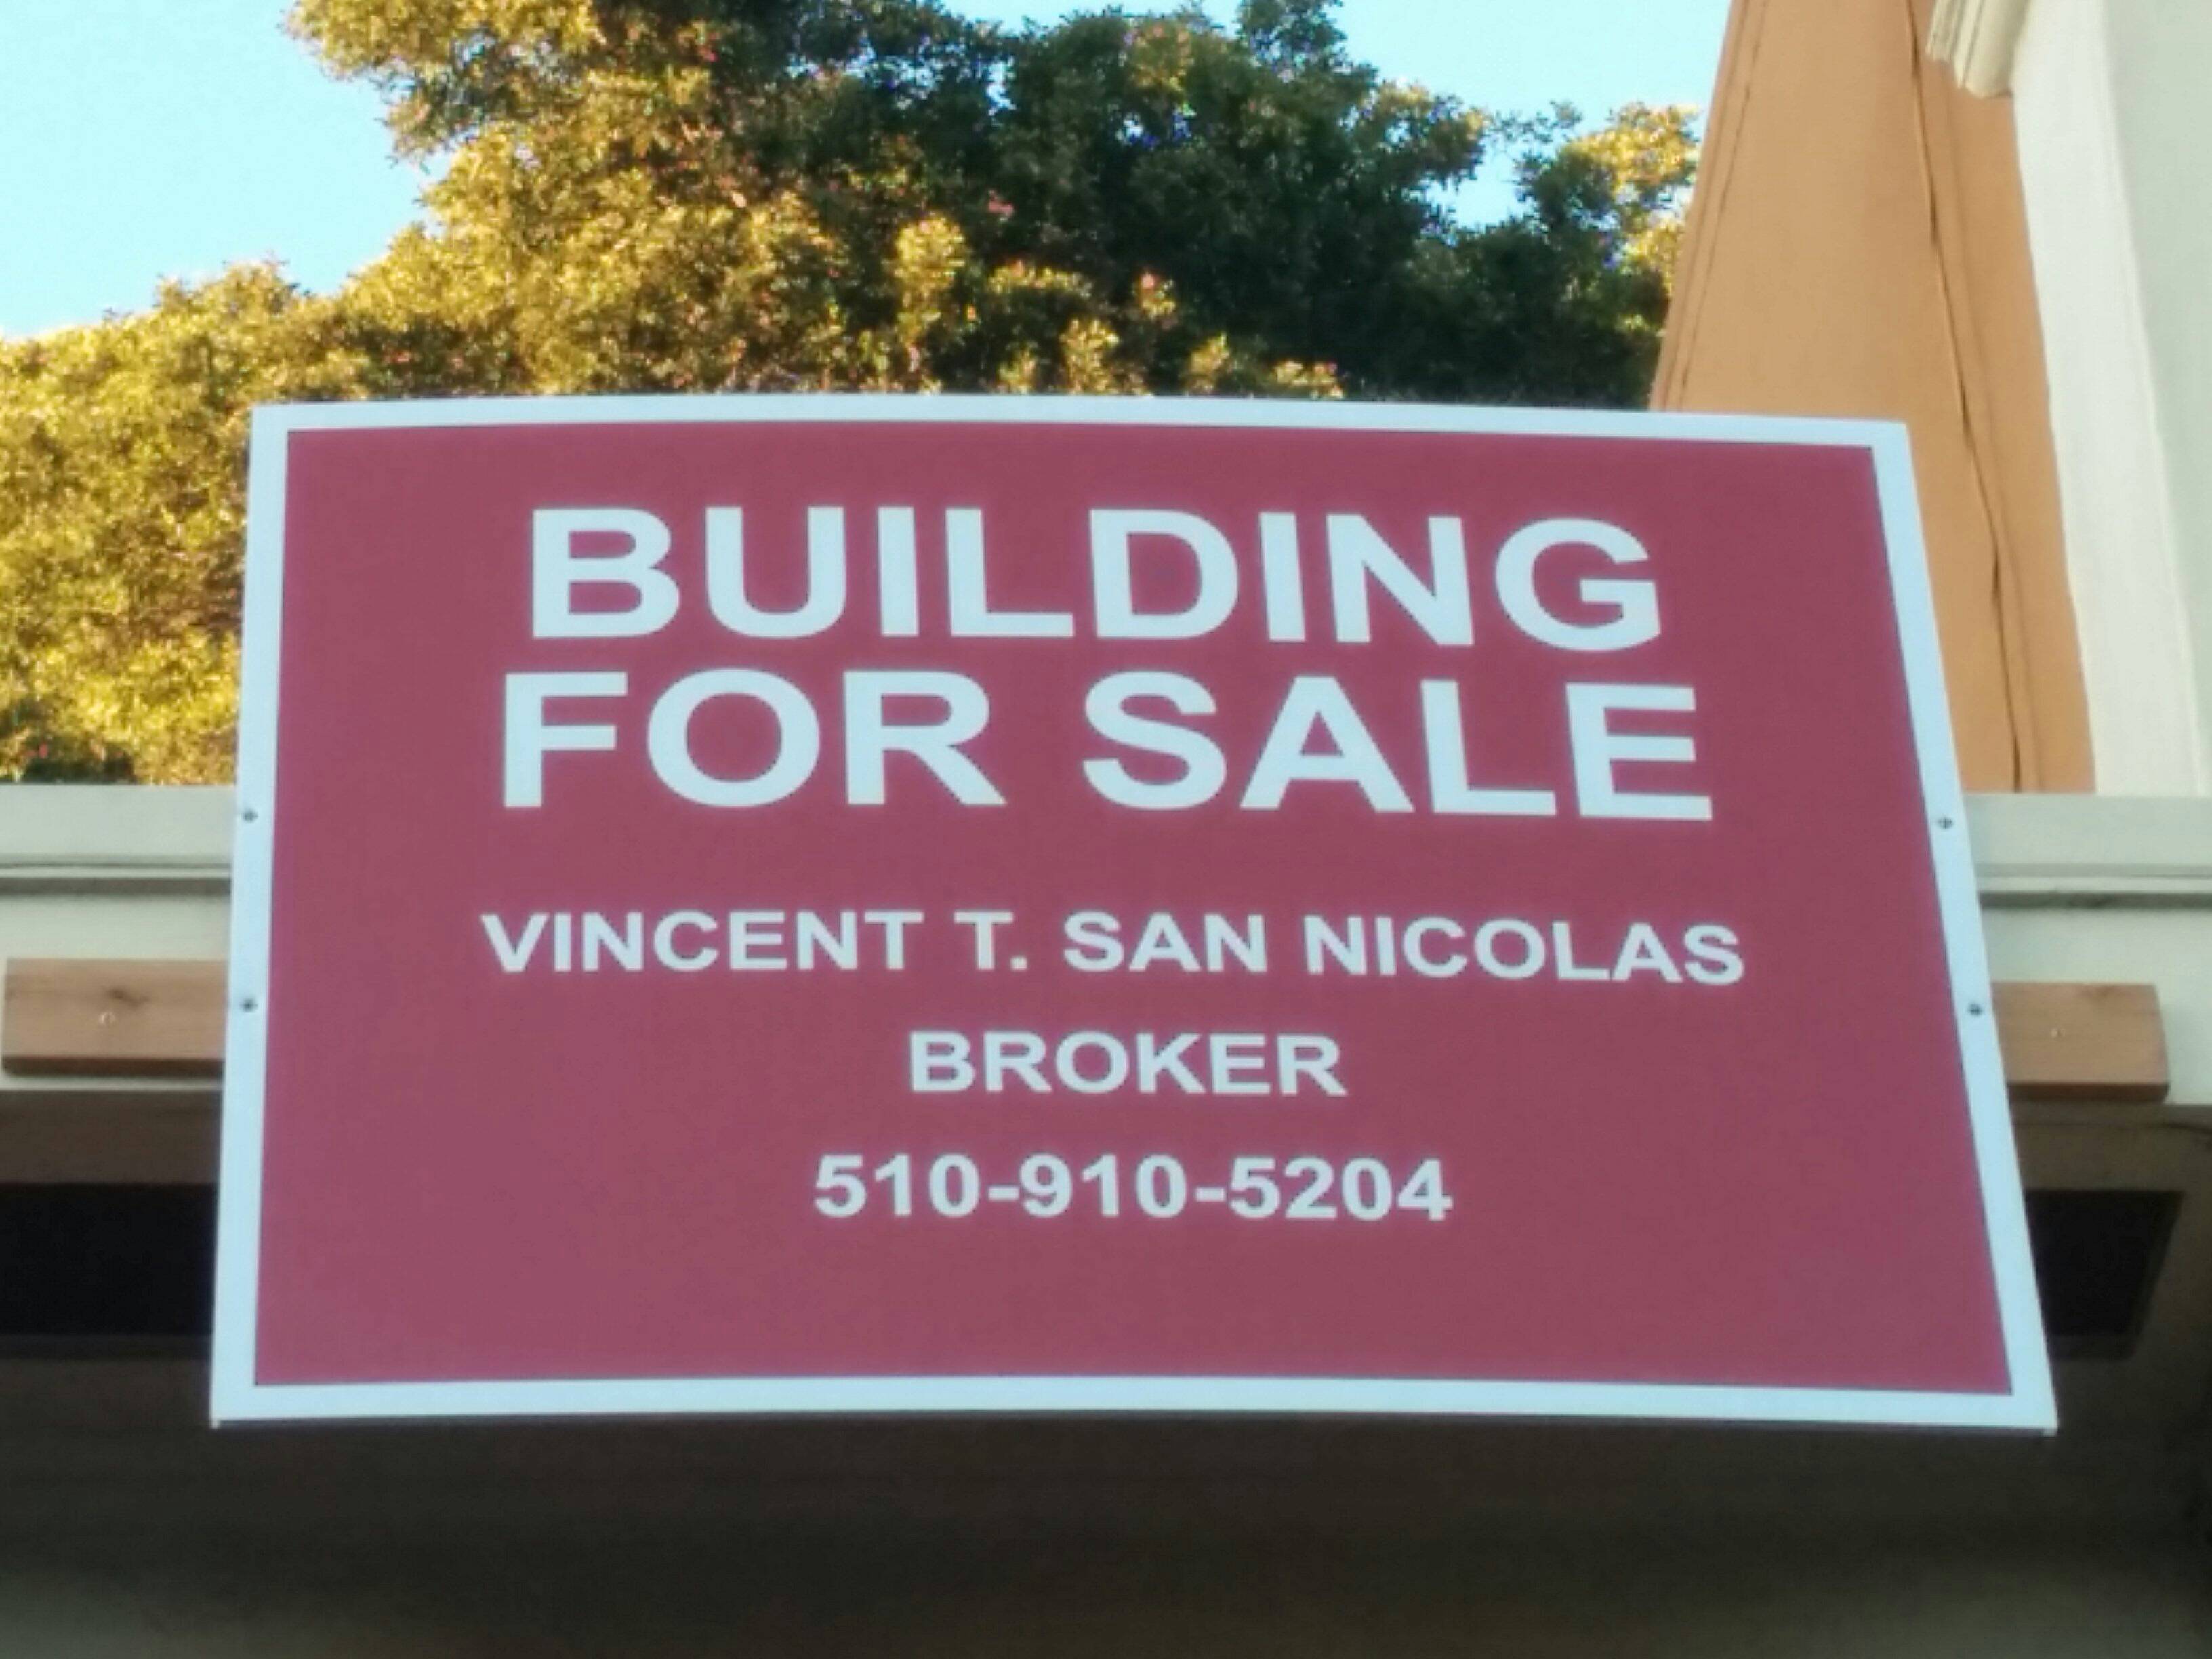 Building for Sale sign